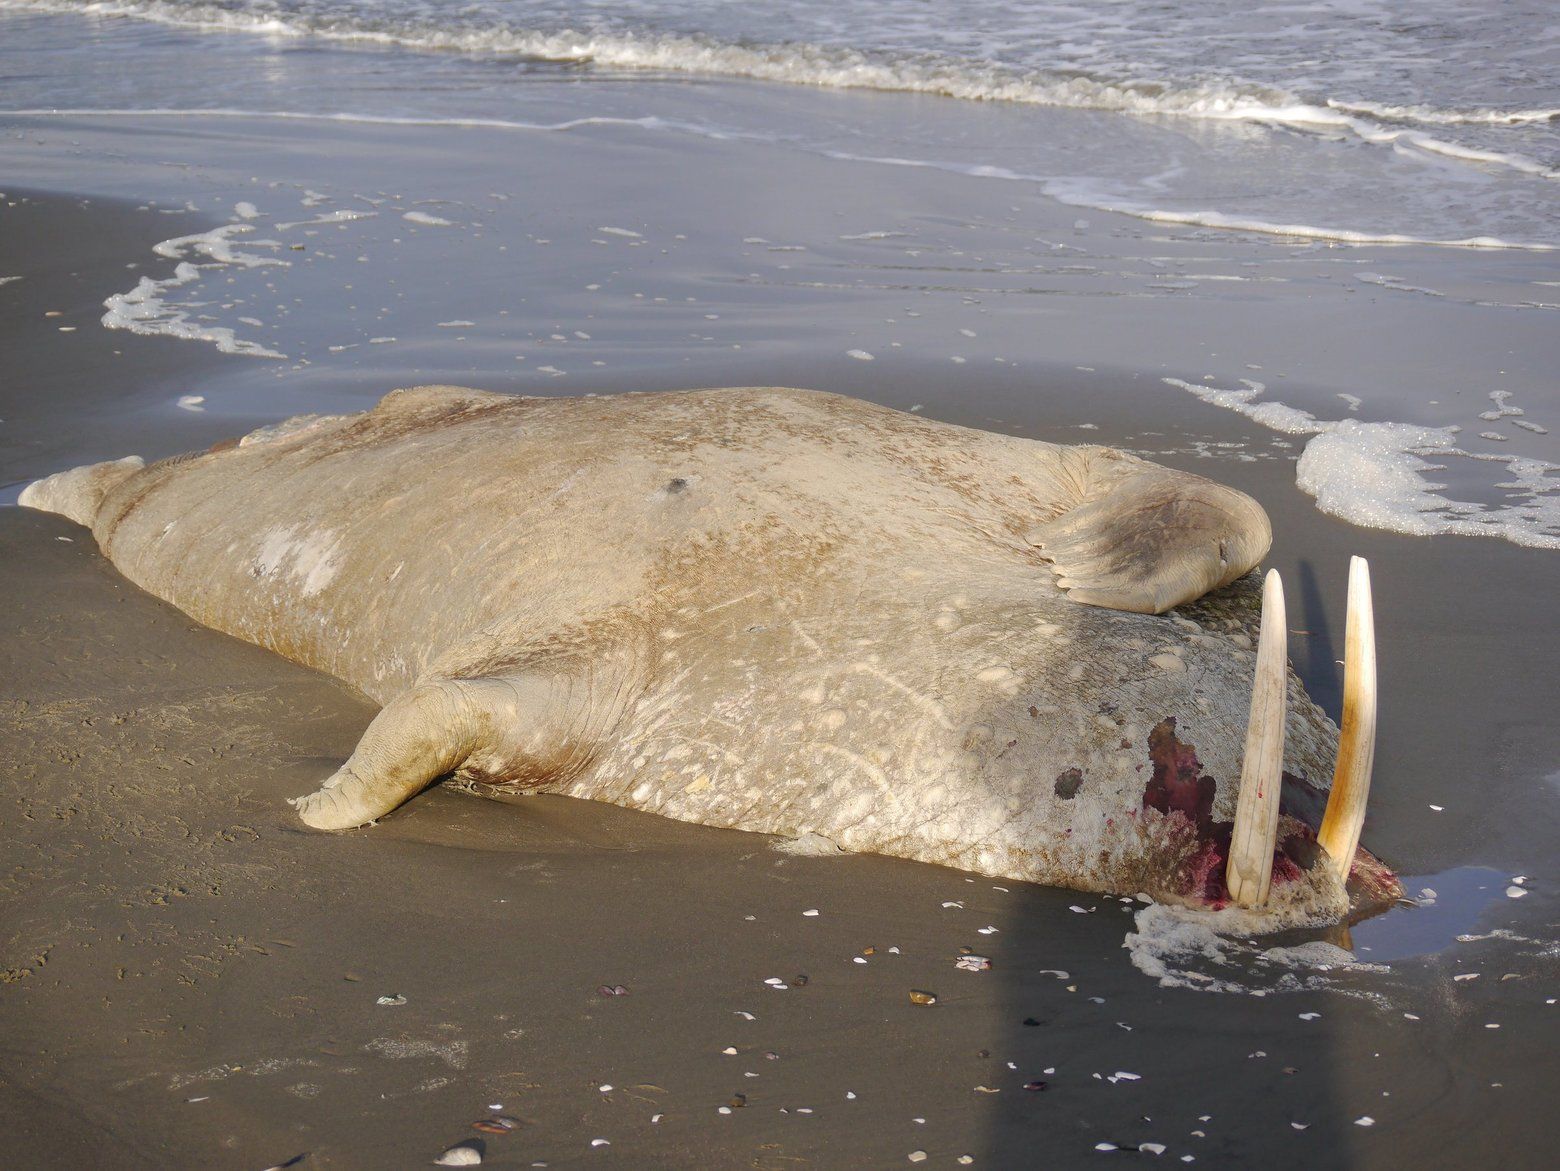 This walrus washed ashore on the Seward Peninsula in the summer of 2017. It was one of more than three dozen walrus carcasses found that summer. Some showed evidence of a toxin from an algae that blooms as the water warms. Image courtesy of U.S. Coast Guard. United States, 2019.